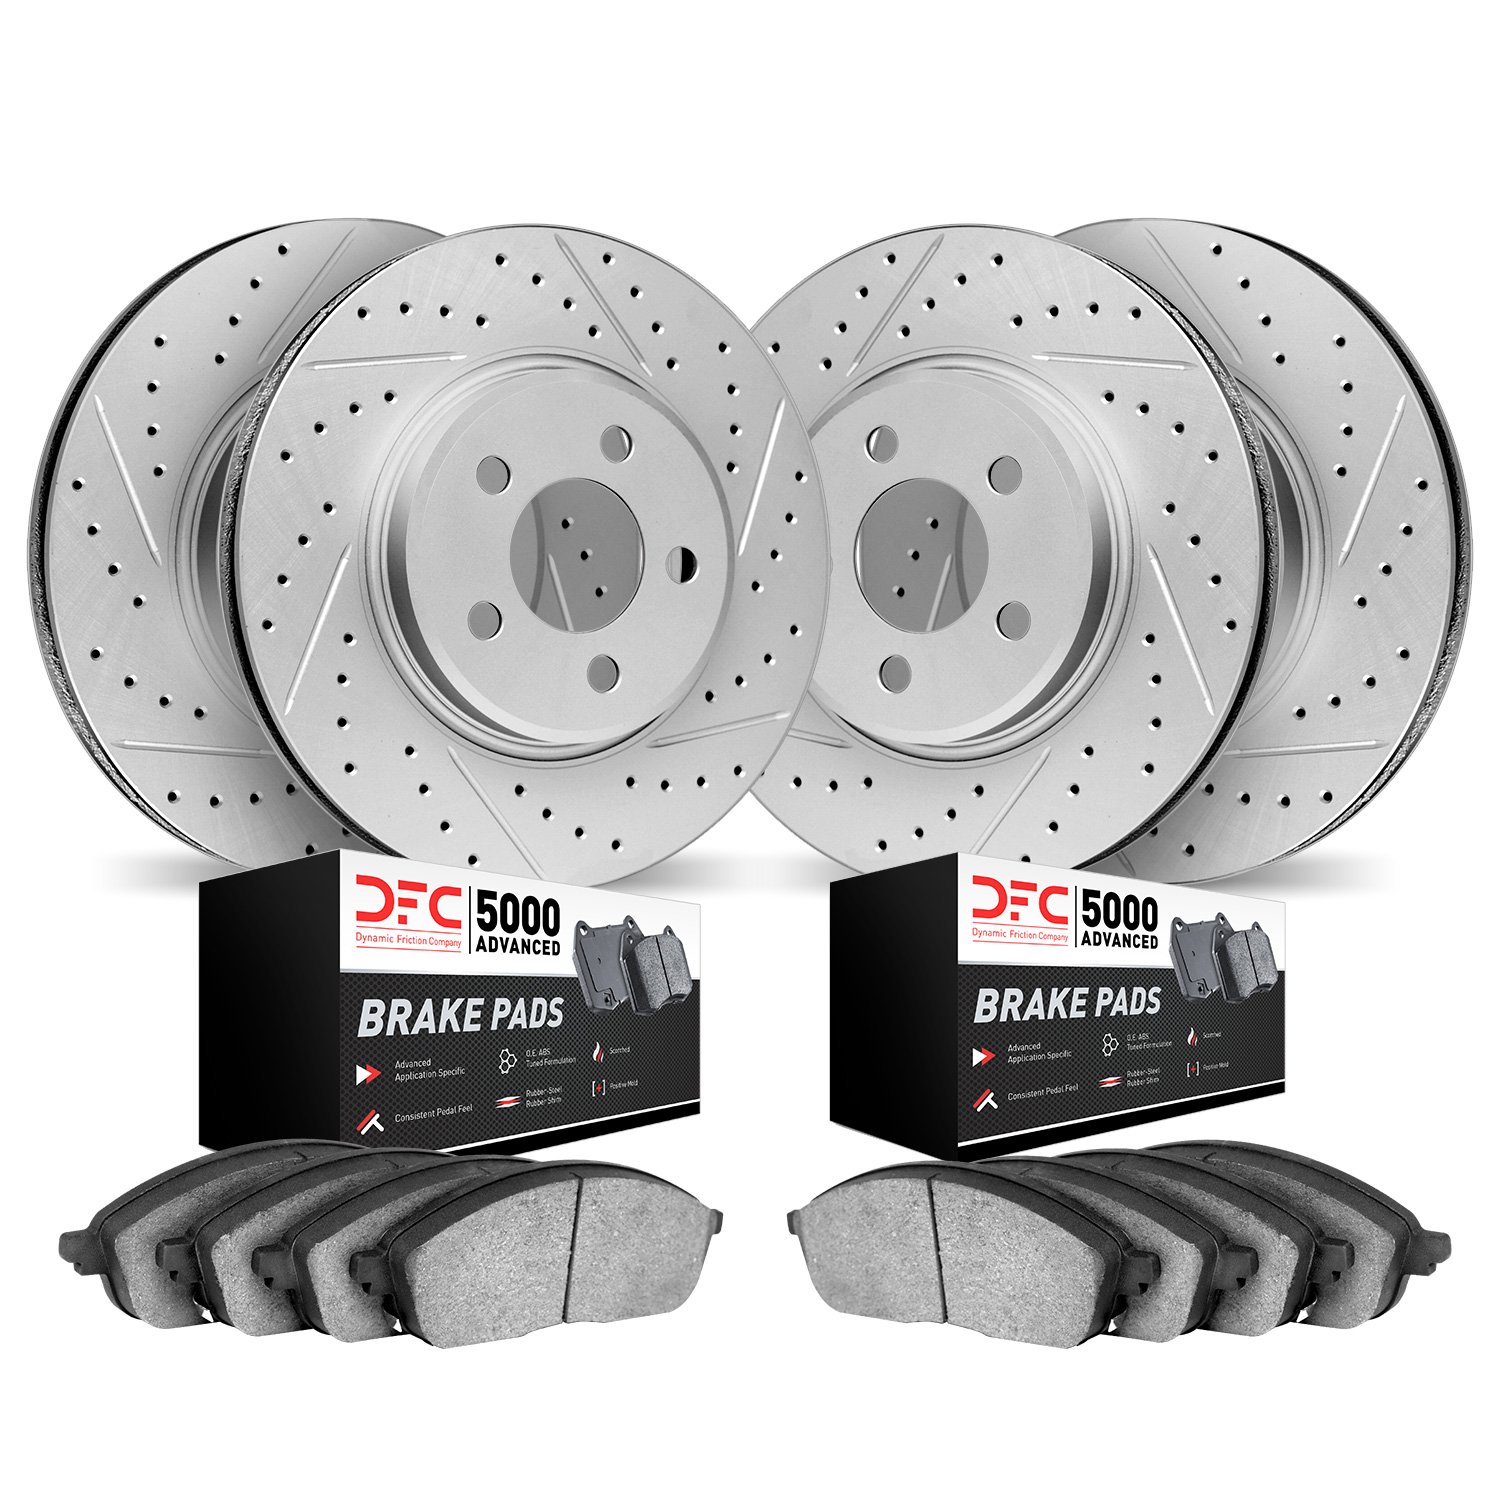 2504-68006 Geoperformance Drilled/Slotted Rotors w/5000 Advanced Brake Pads Kit, 2014-2014 Infiniti/Nissan, Position: Front and